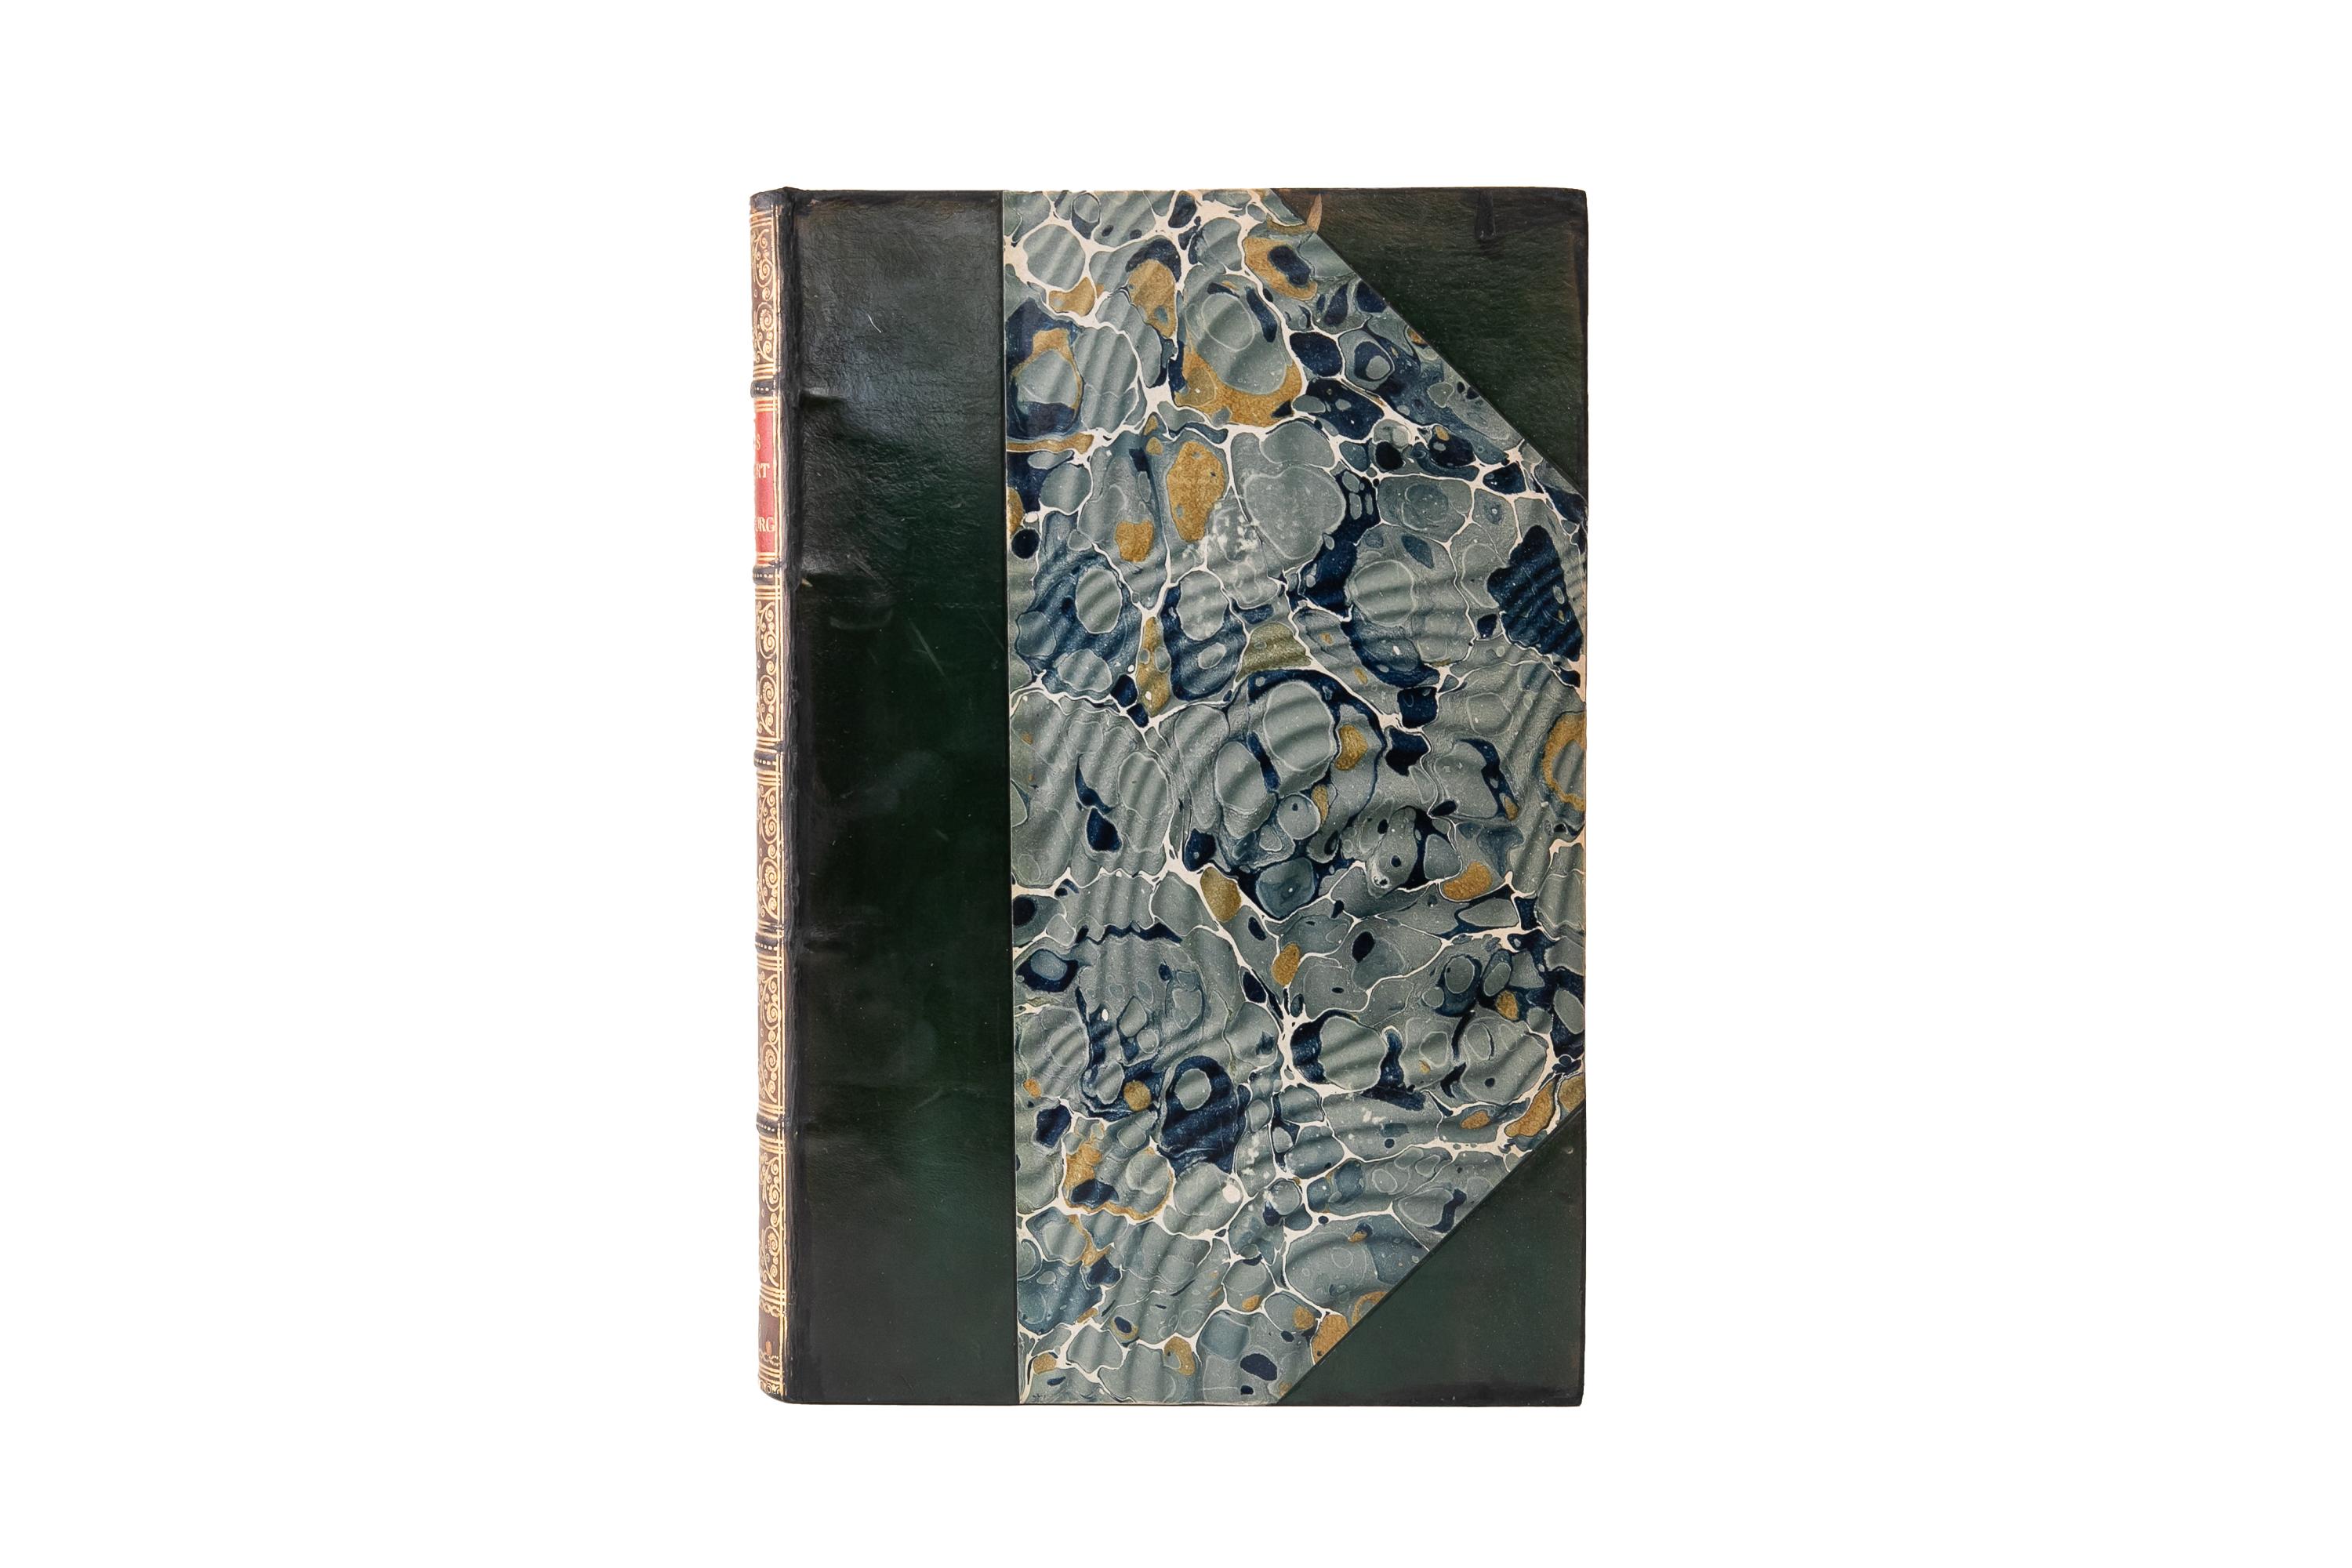 1 Volume. The Court of St. Petersburg, Secret Memoirs. Limited Edition. Bound by Zaehnsdorf in 3.4 green calf and marbled boards. Raised band spine gilt-tooled with a red morocco label. Top edge gilt with marbled endpapers. The edition is limited to